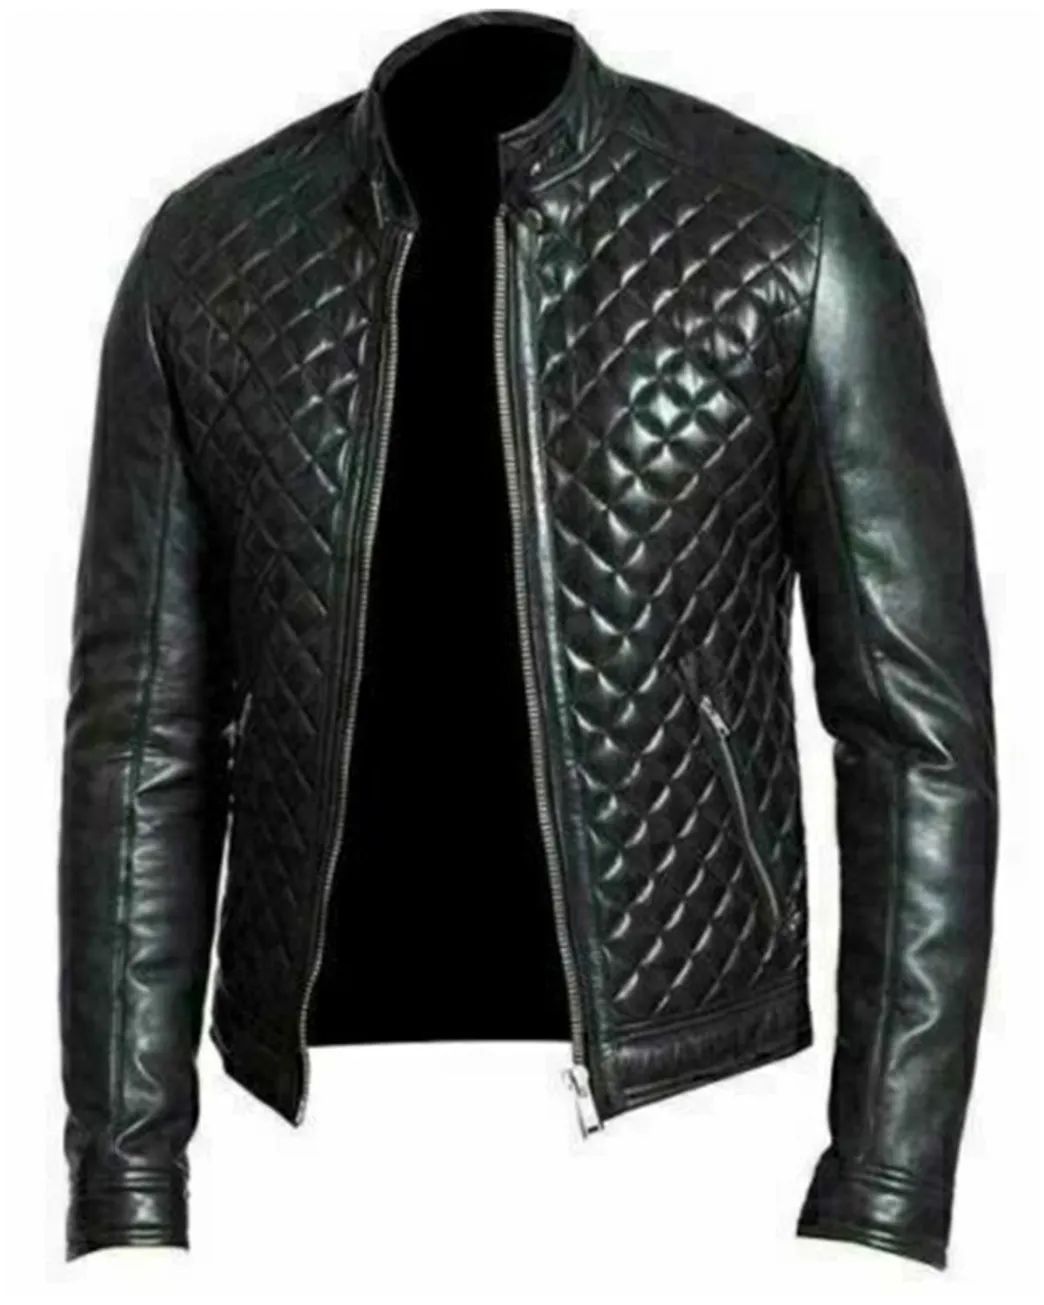 Mens Diamond Quilted Black Leather Jacket